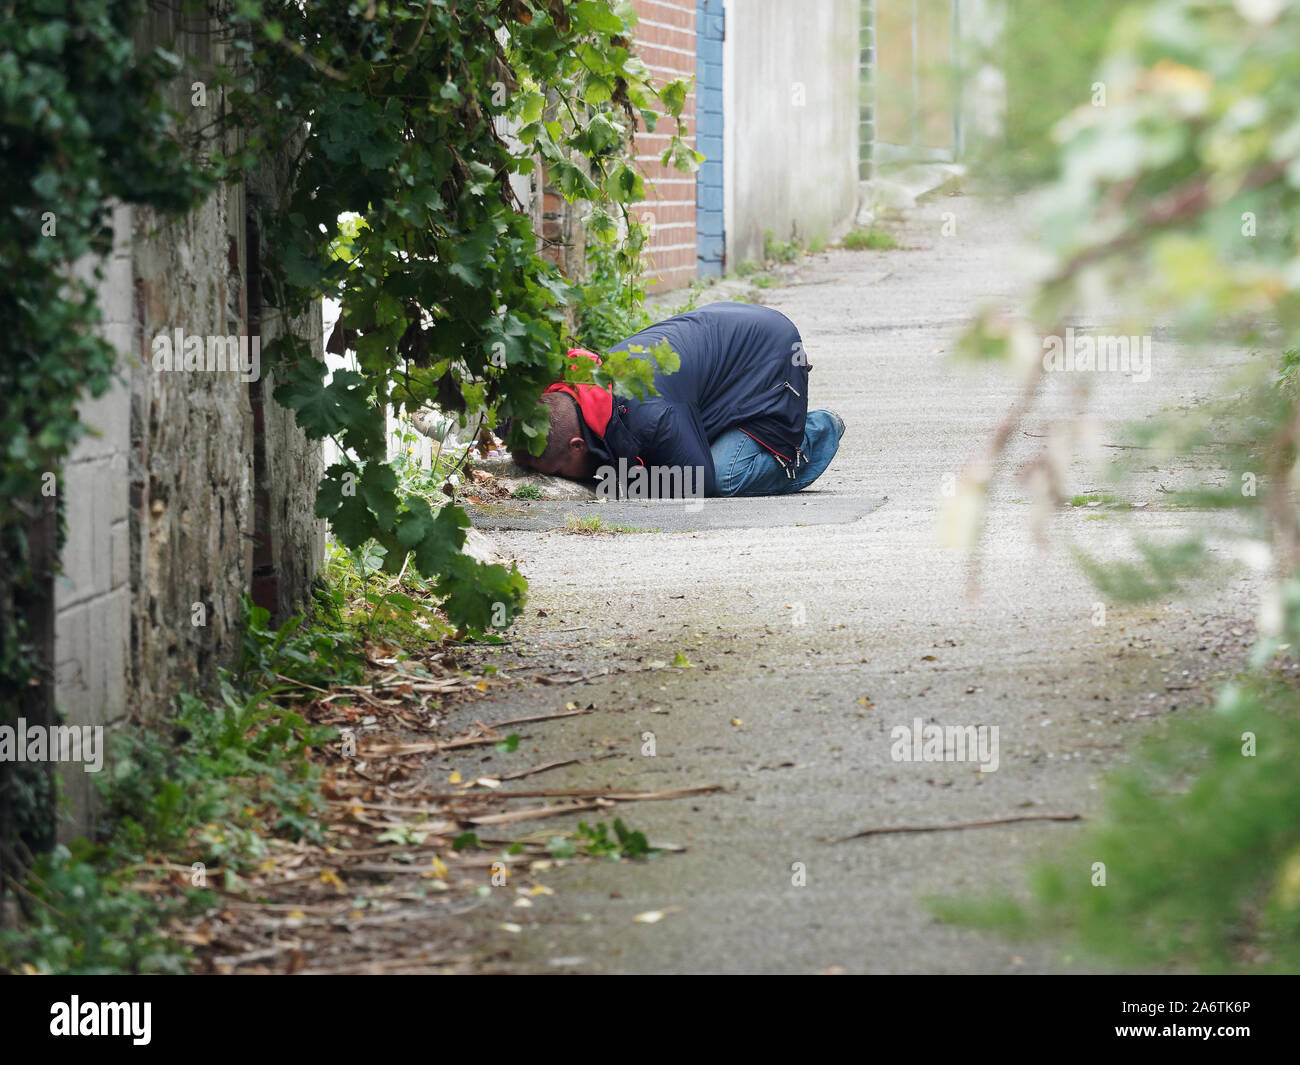 Newquay, Cornwall, England, 16th September 2019. Street drug user with National Health provided drug use kit collapses in the street.. Credit: Robert Stock Photo